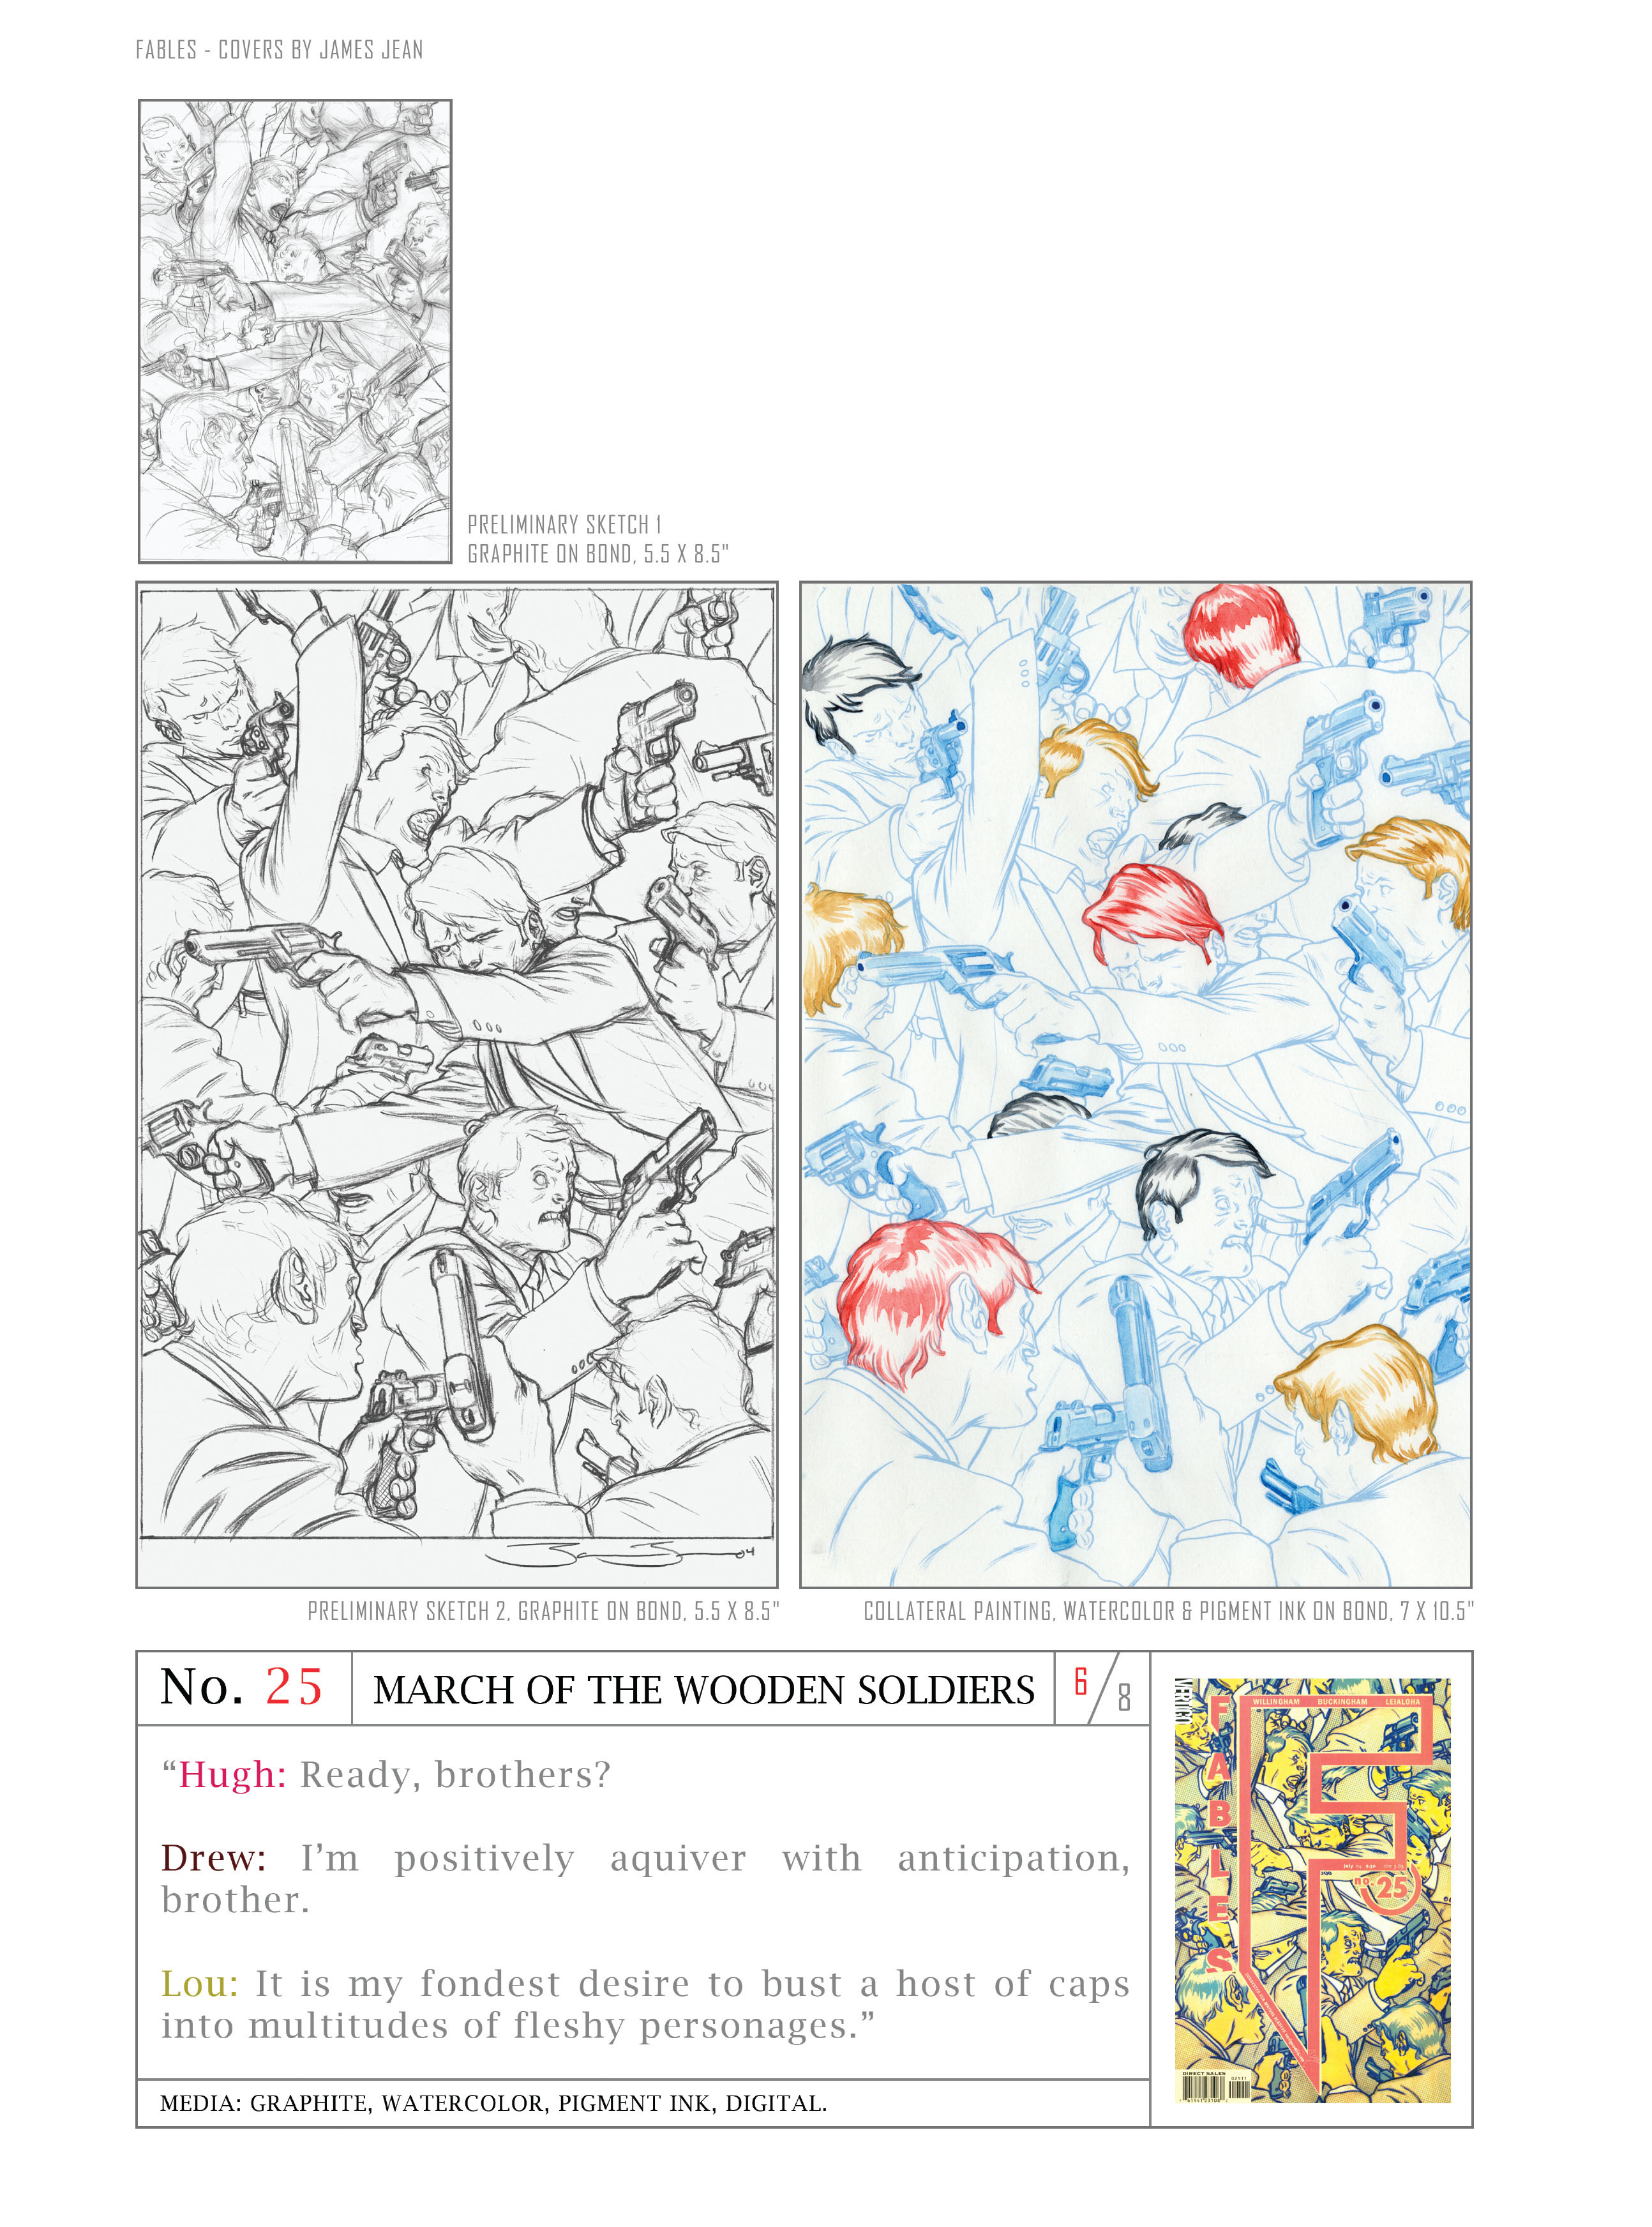 Read online Fables: Covers by James Jean comic -  Issue # TPB (Part 1) - 63